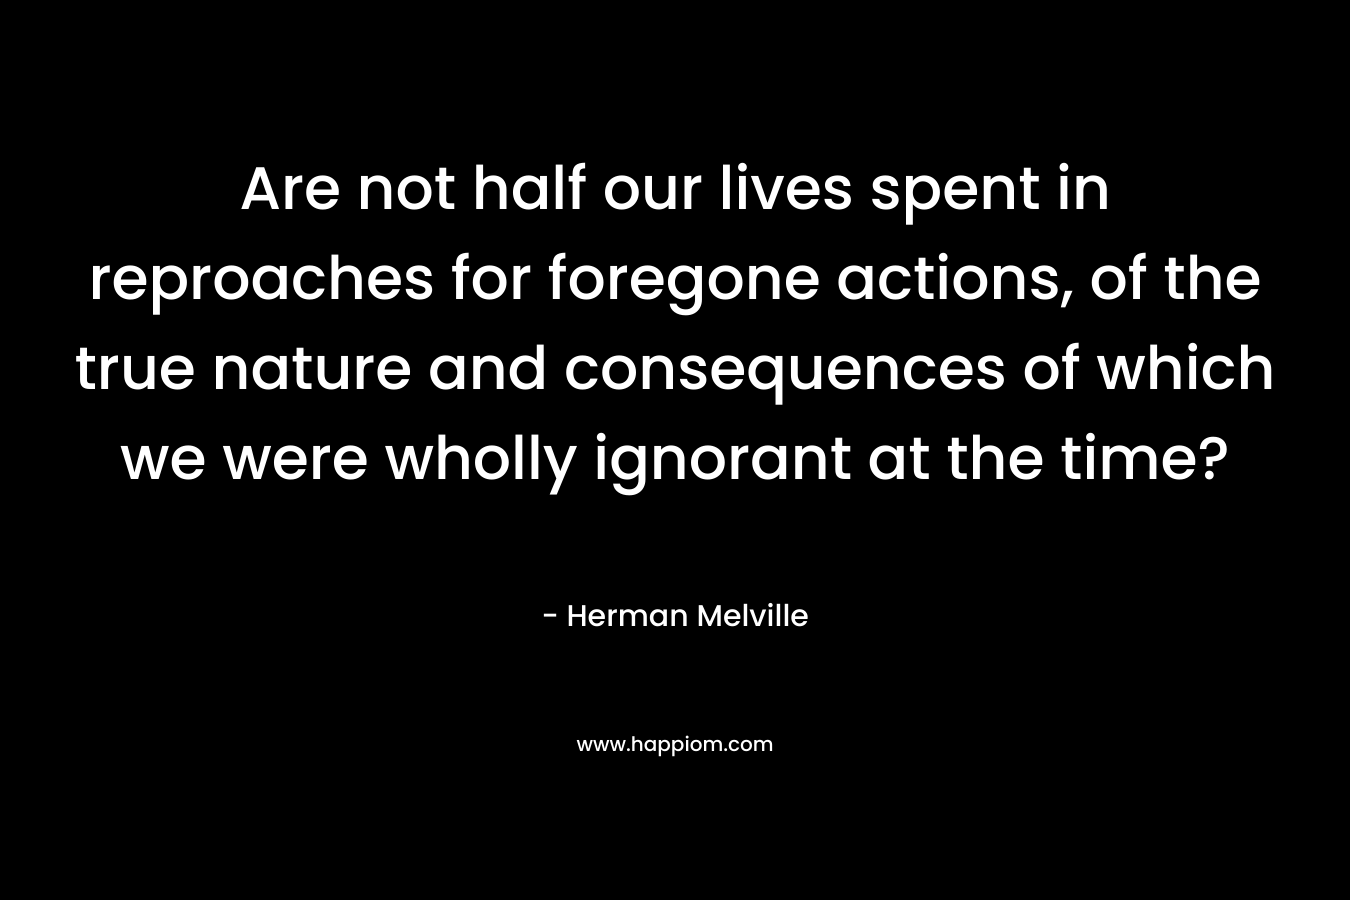 Are not half our lives spent in reproaches for foregone actions, of the true nature and consequences of which we were wholly ignorant at the time? – Herman Melville